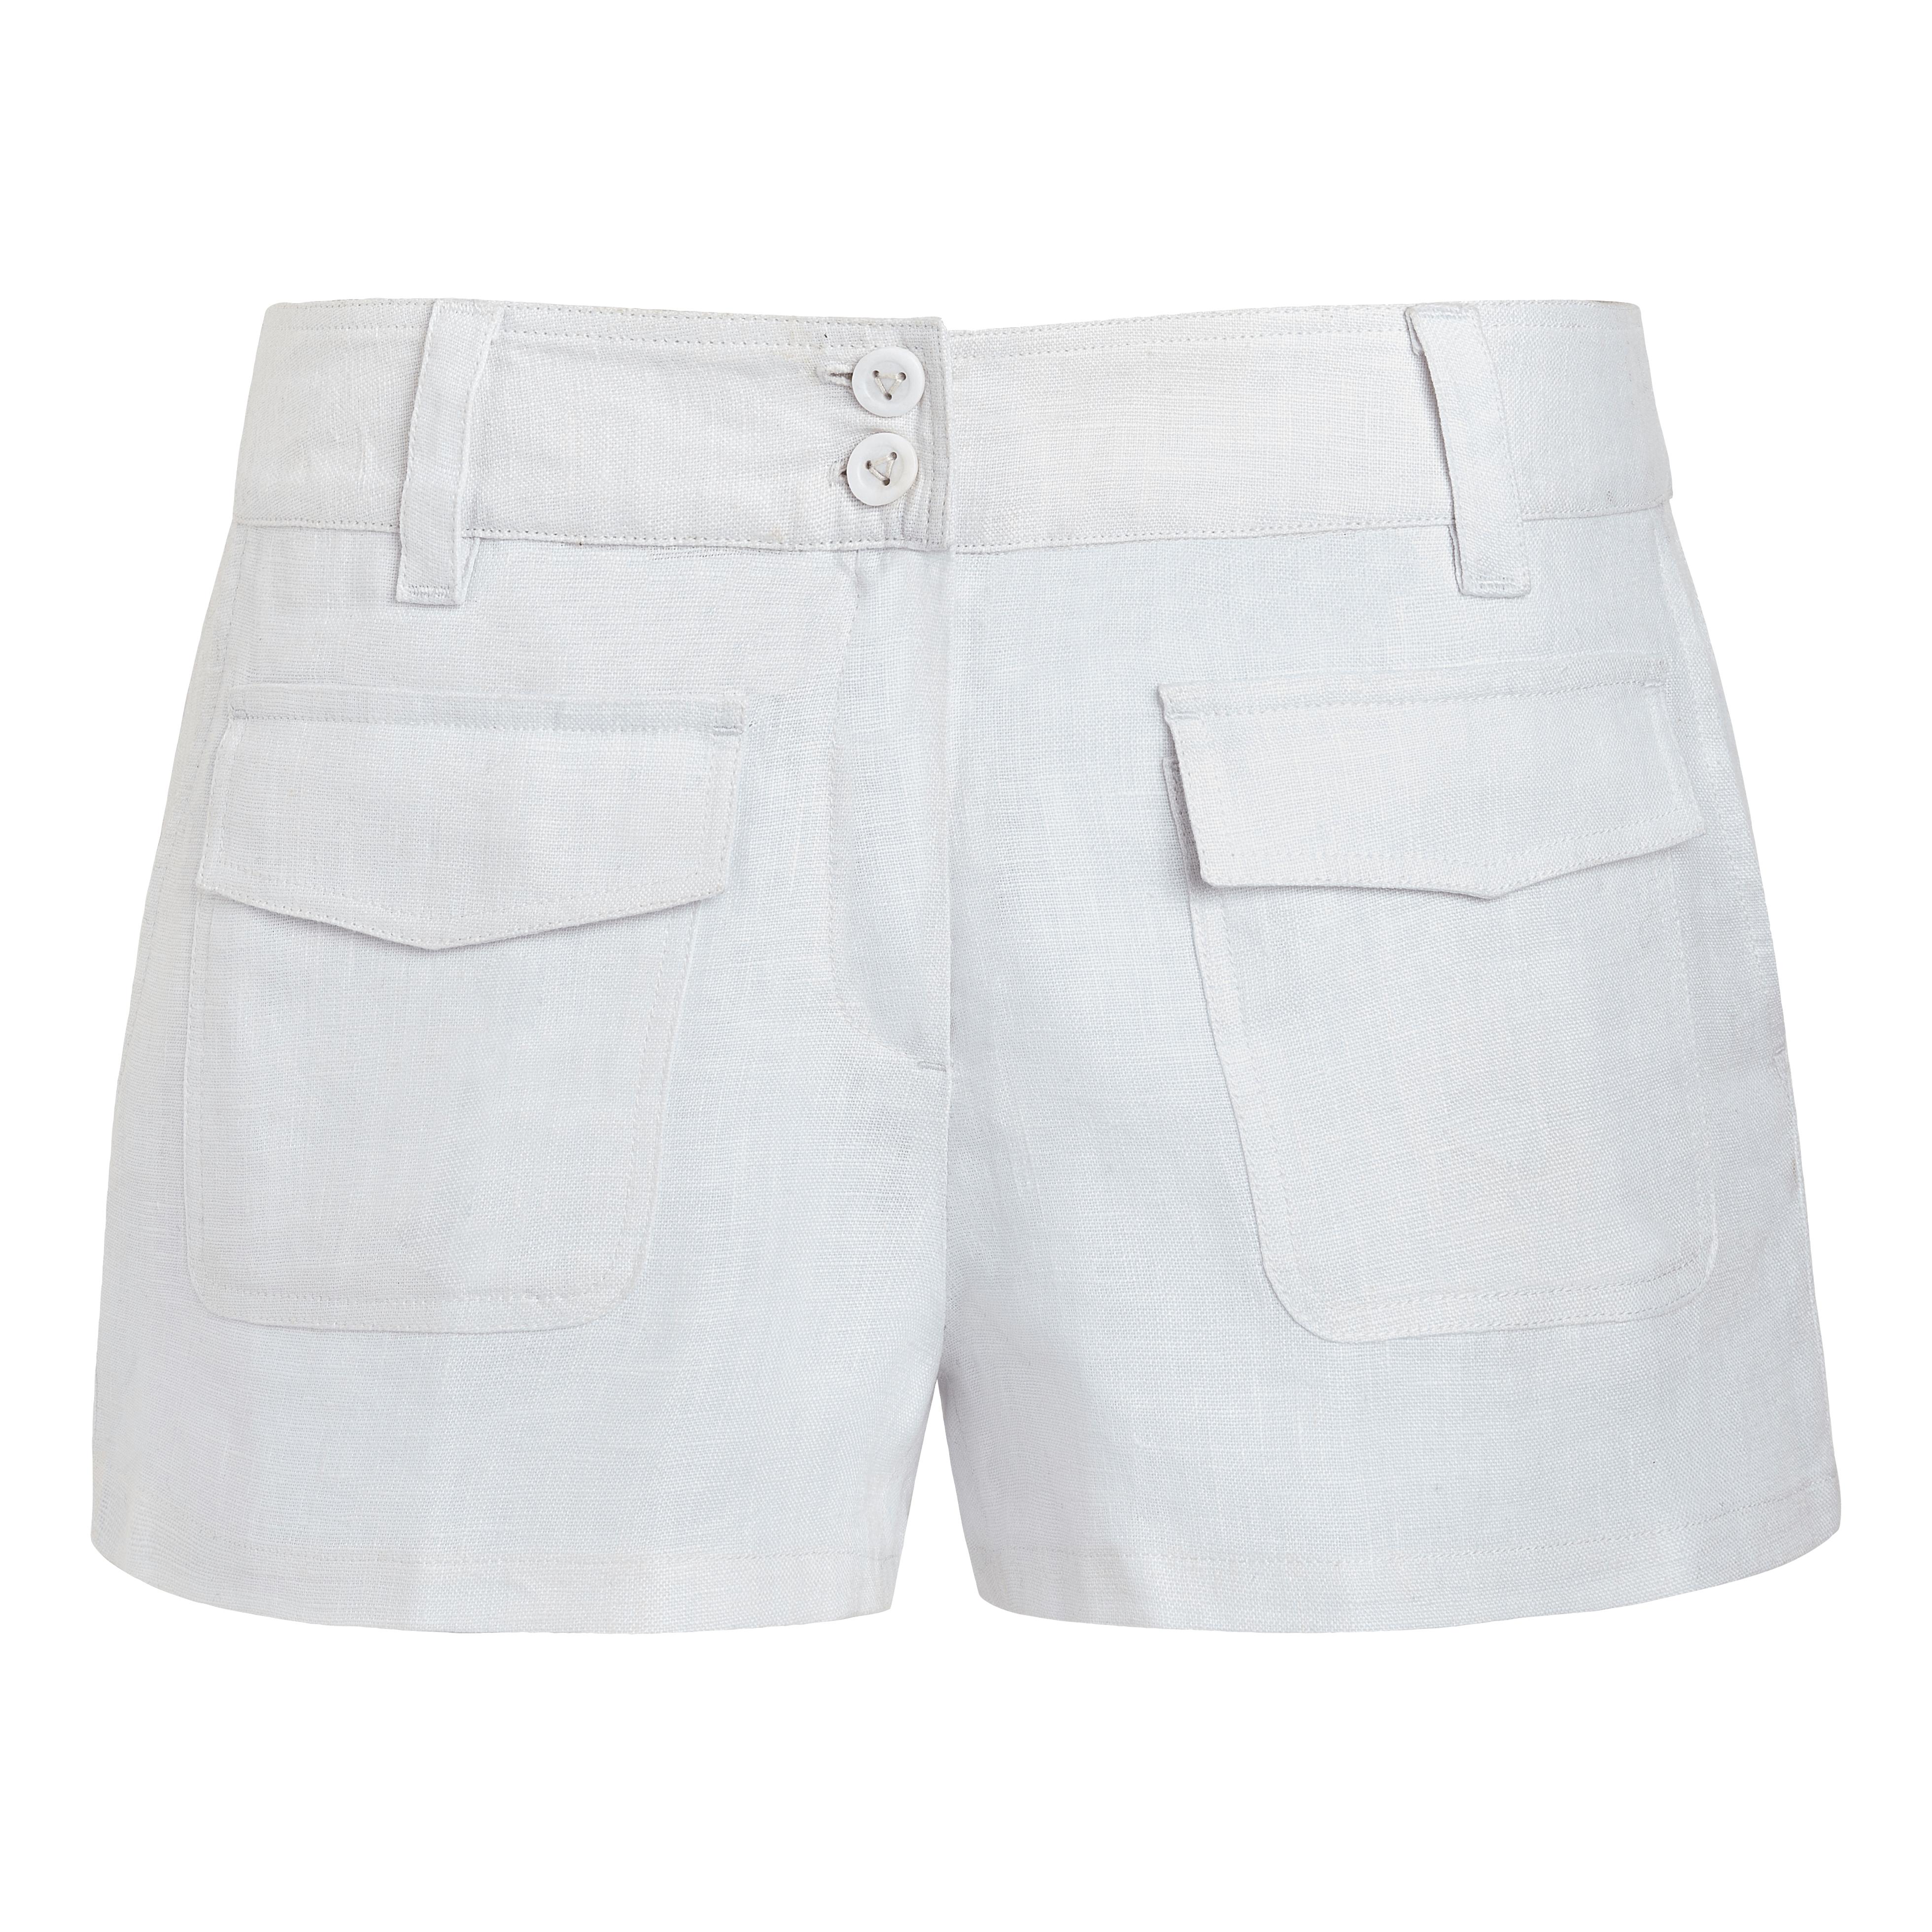 Vilebrequin Linen Bermuda Shorts Solid - X Jcc+ - Limited Edition in ...